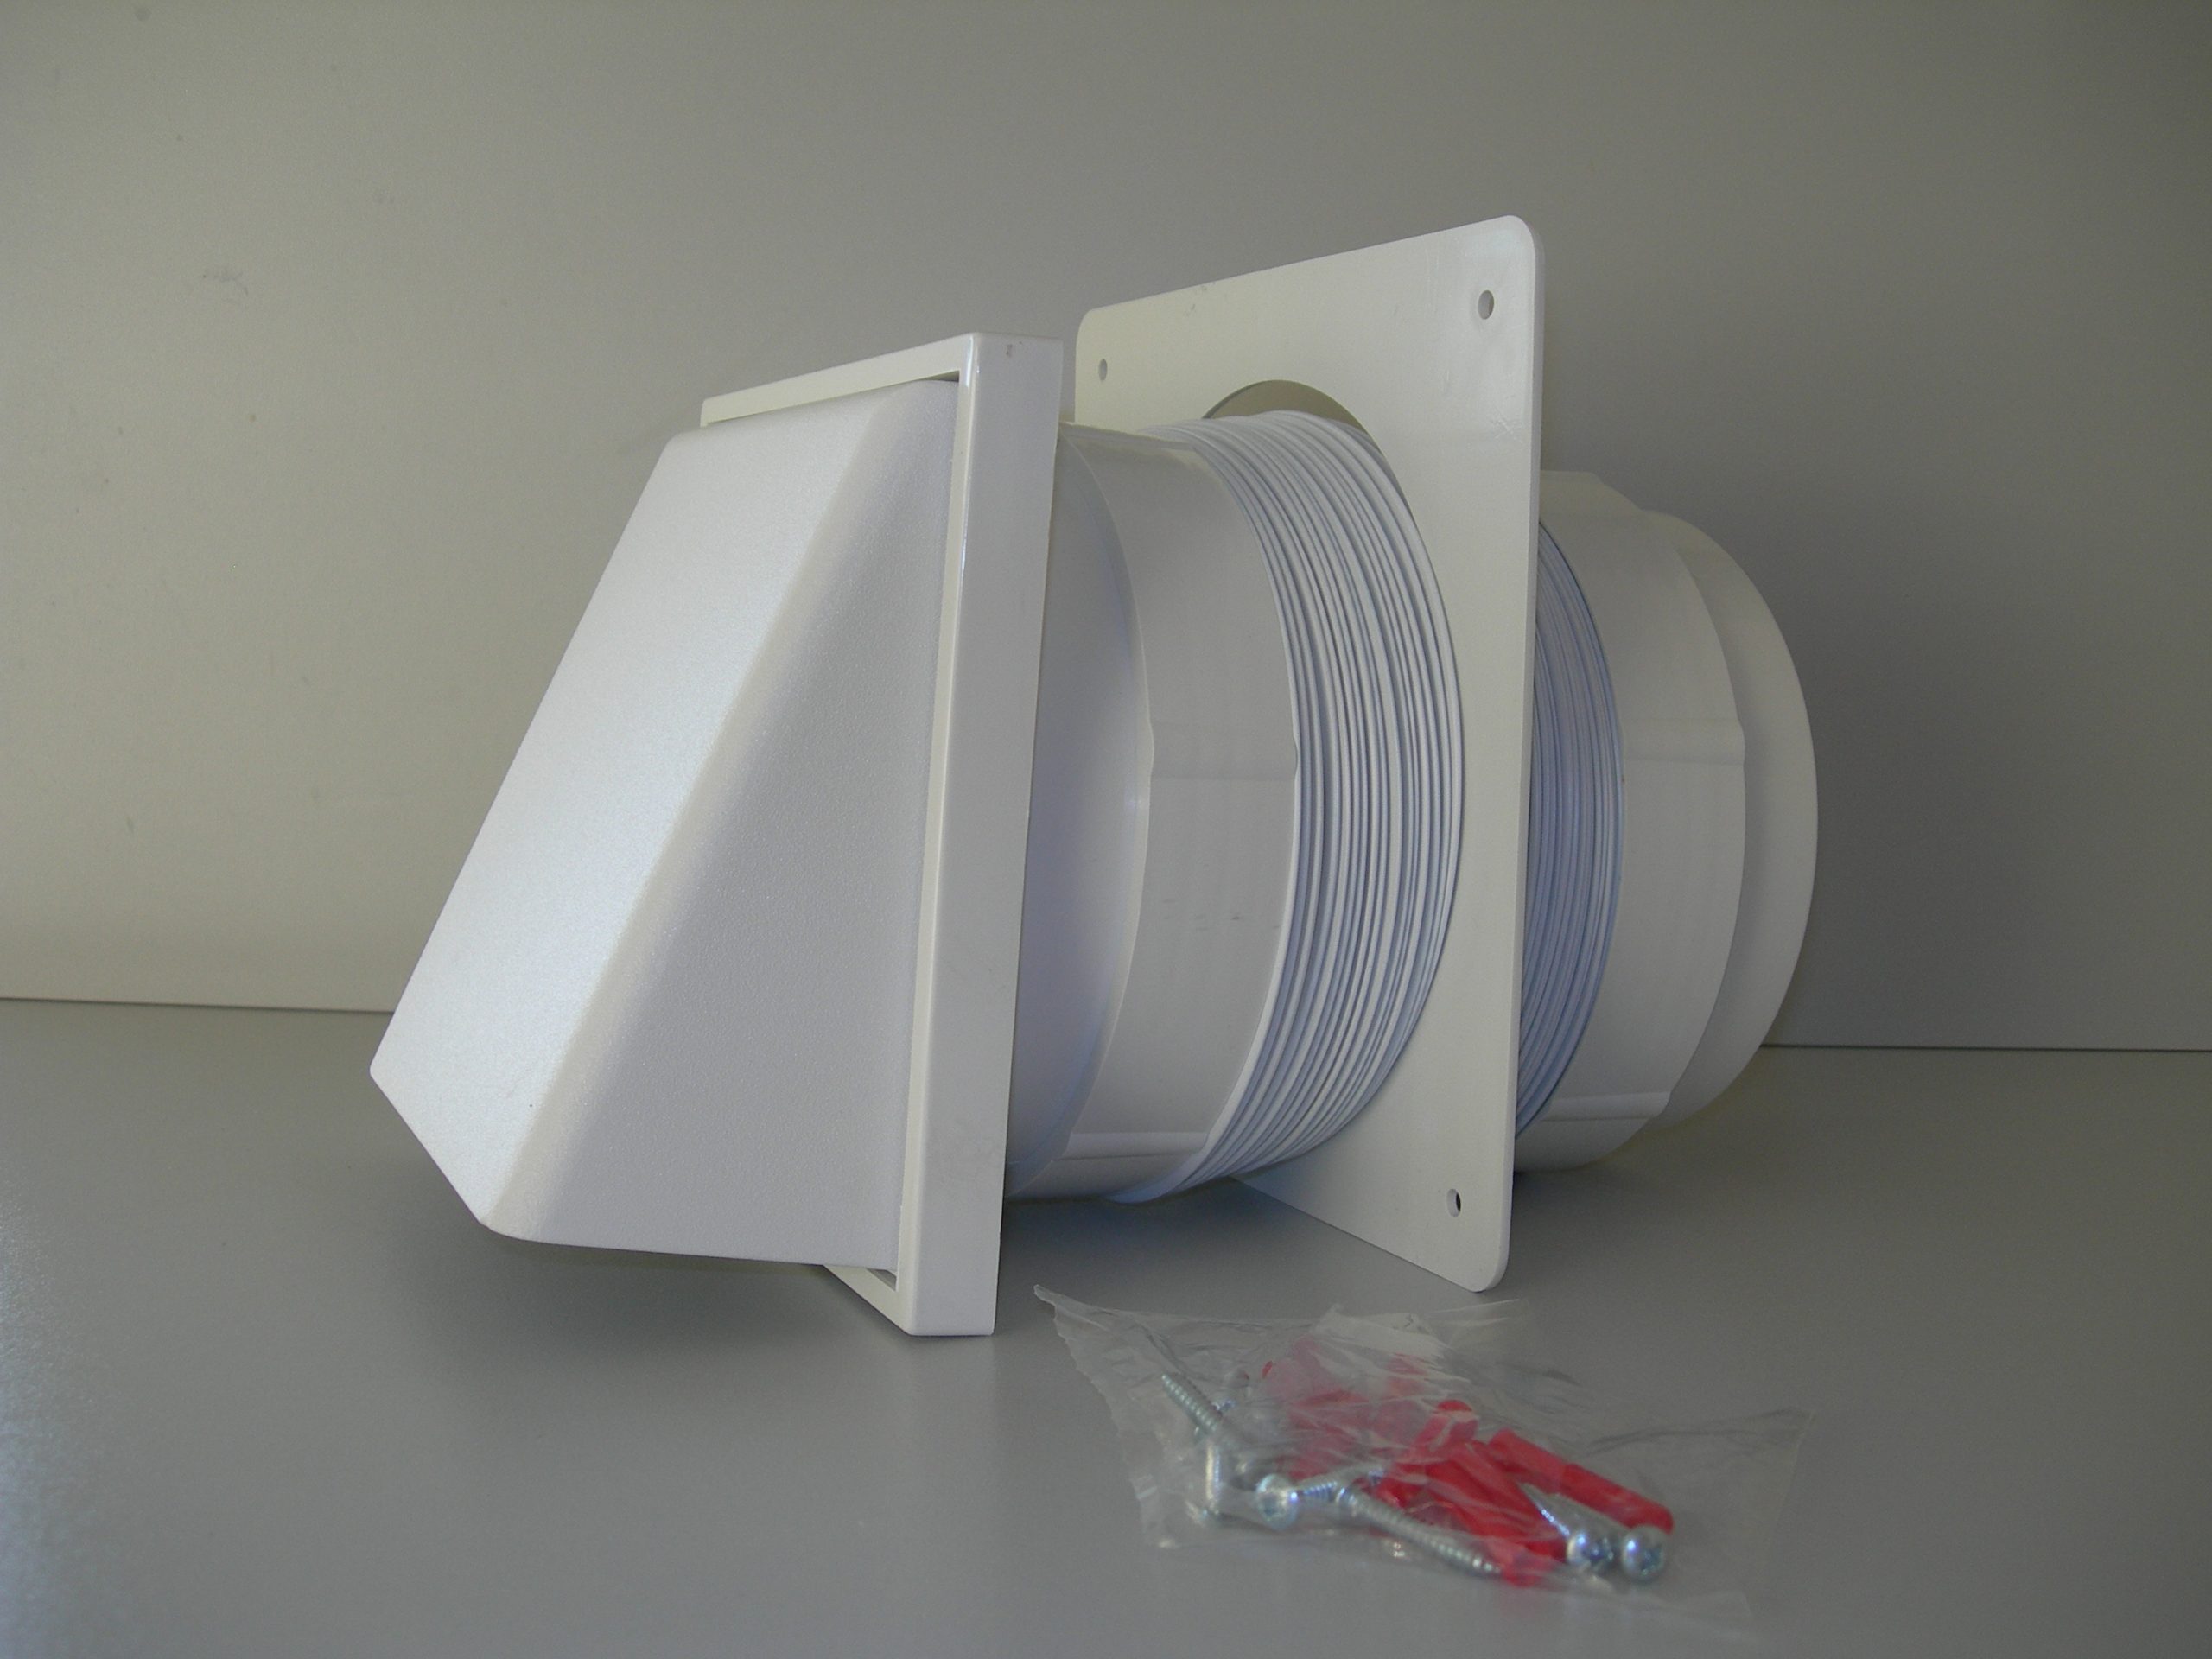 Details About Manrose Cowled Wall Grille Ventilation Kit Extraction Fan Plastic Ducting 7202w with regard to sizing 3072 X 2304